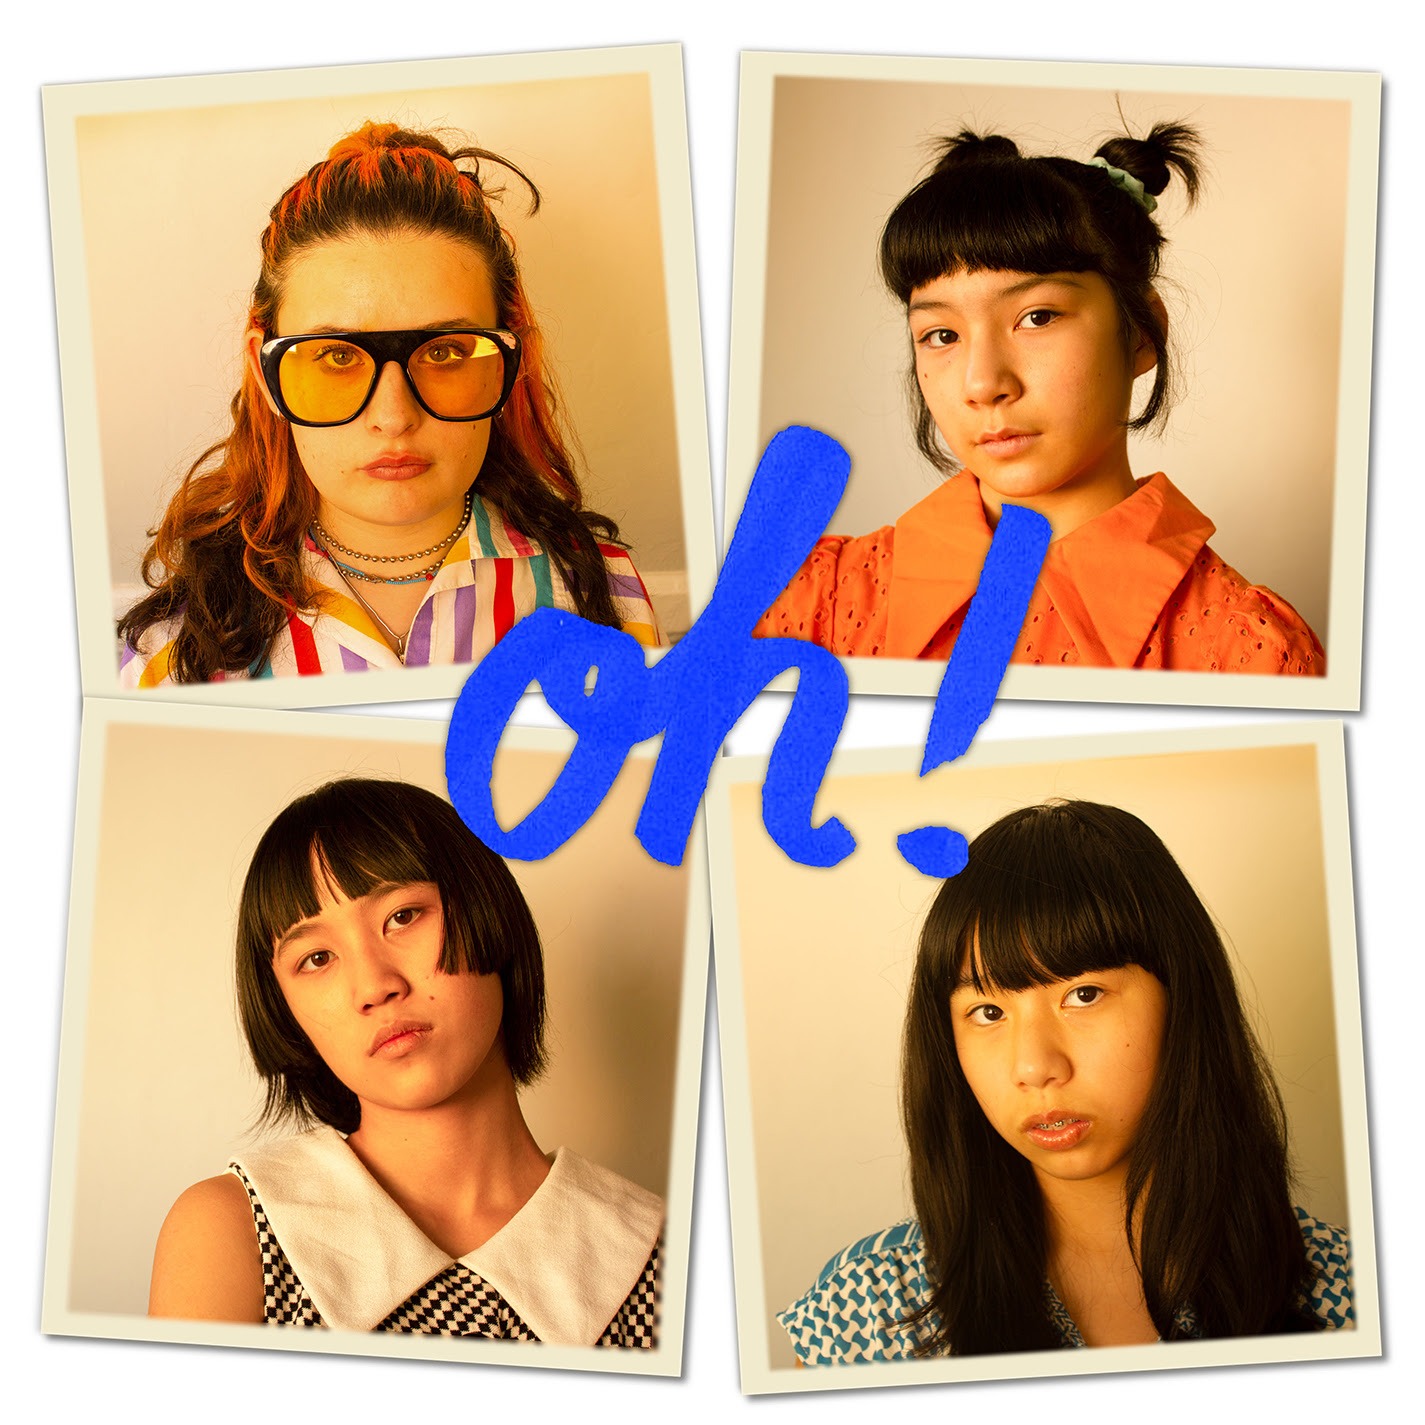 NEWS: The Linda Linda’s release new riot-girl single ‘Oh!’